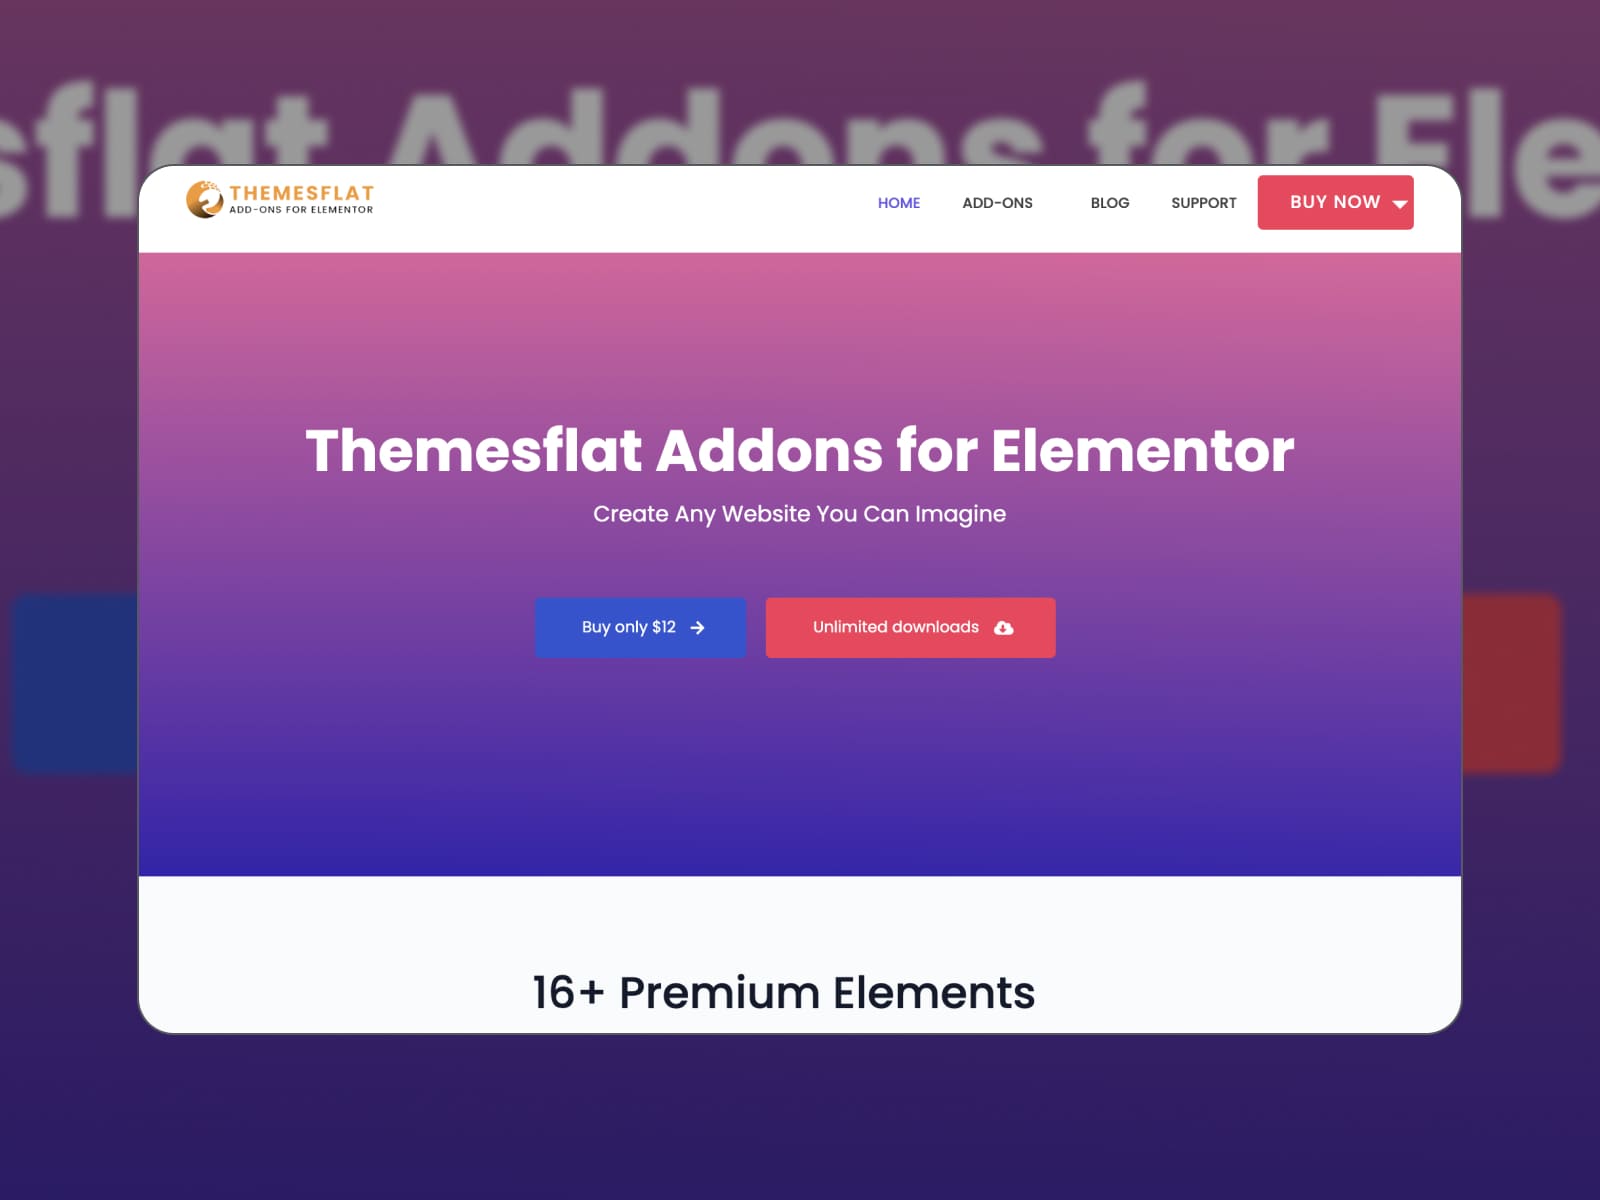 The landing page of the WooCommerce Elementor addons.